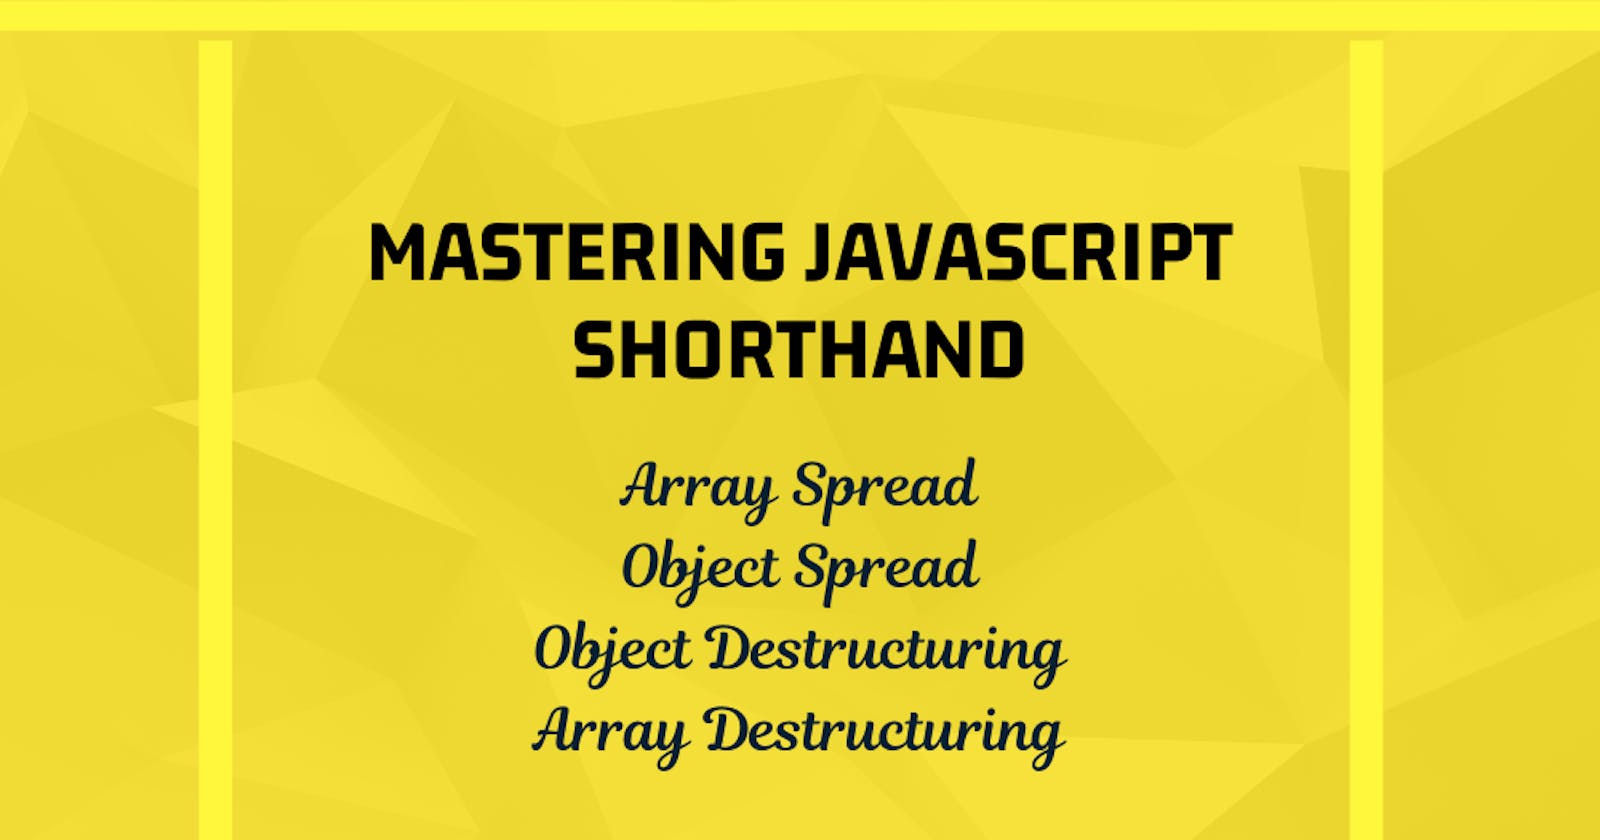 Mastering JS Shorthand Part-4: Array Spread and Object Destructuring